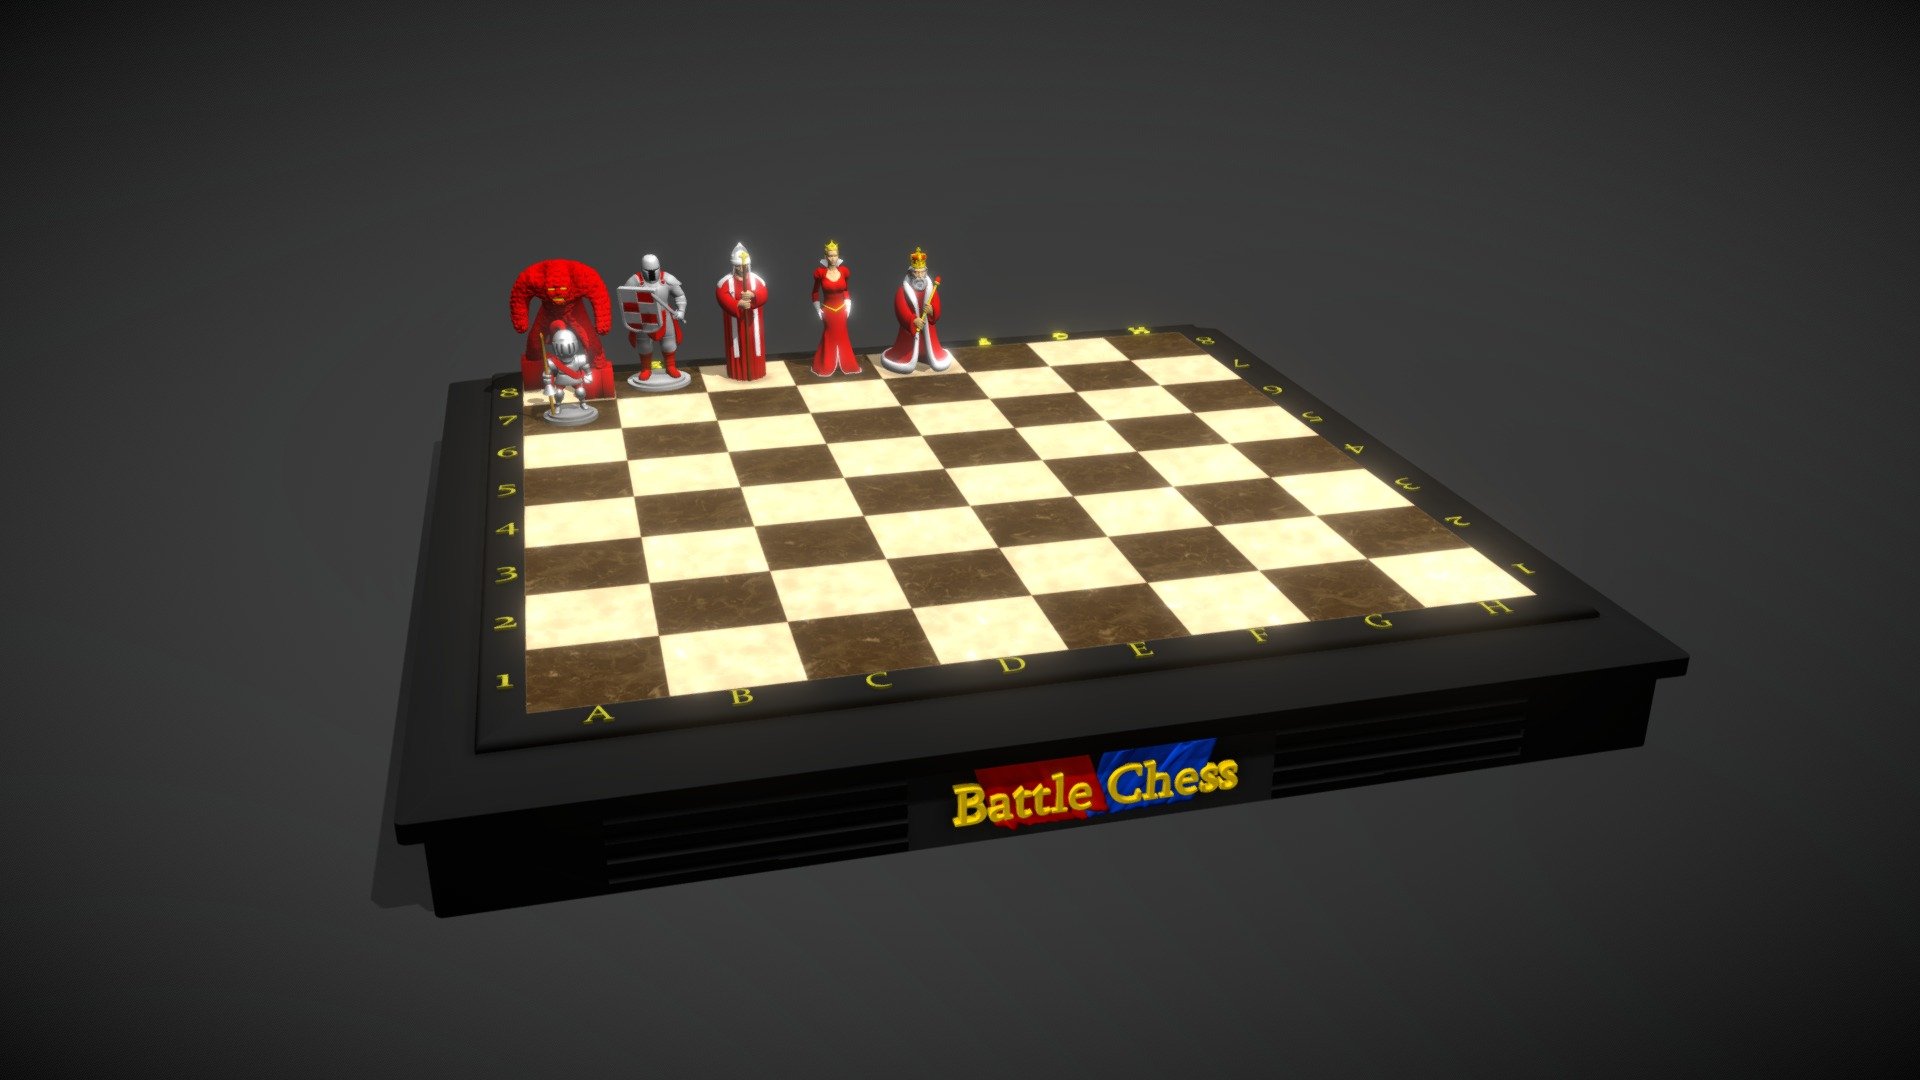 Battle Chess: Game of Kings PC Gameplay FullHD 1080p 